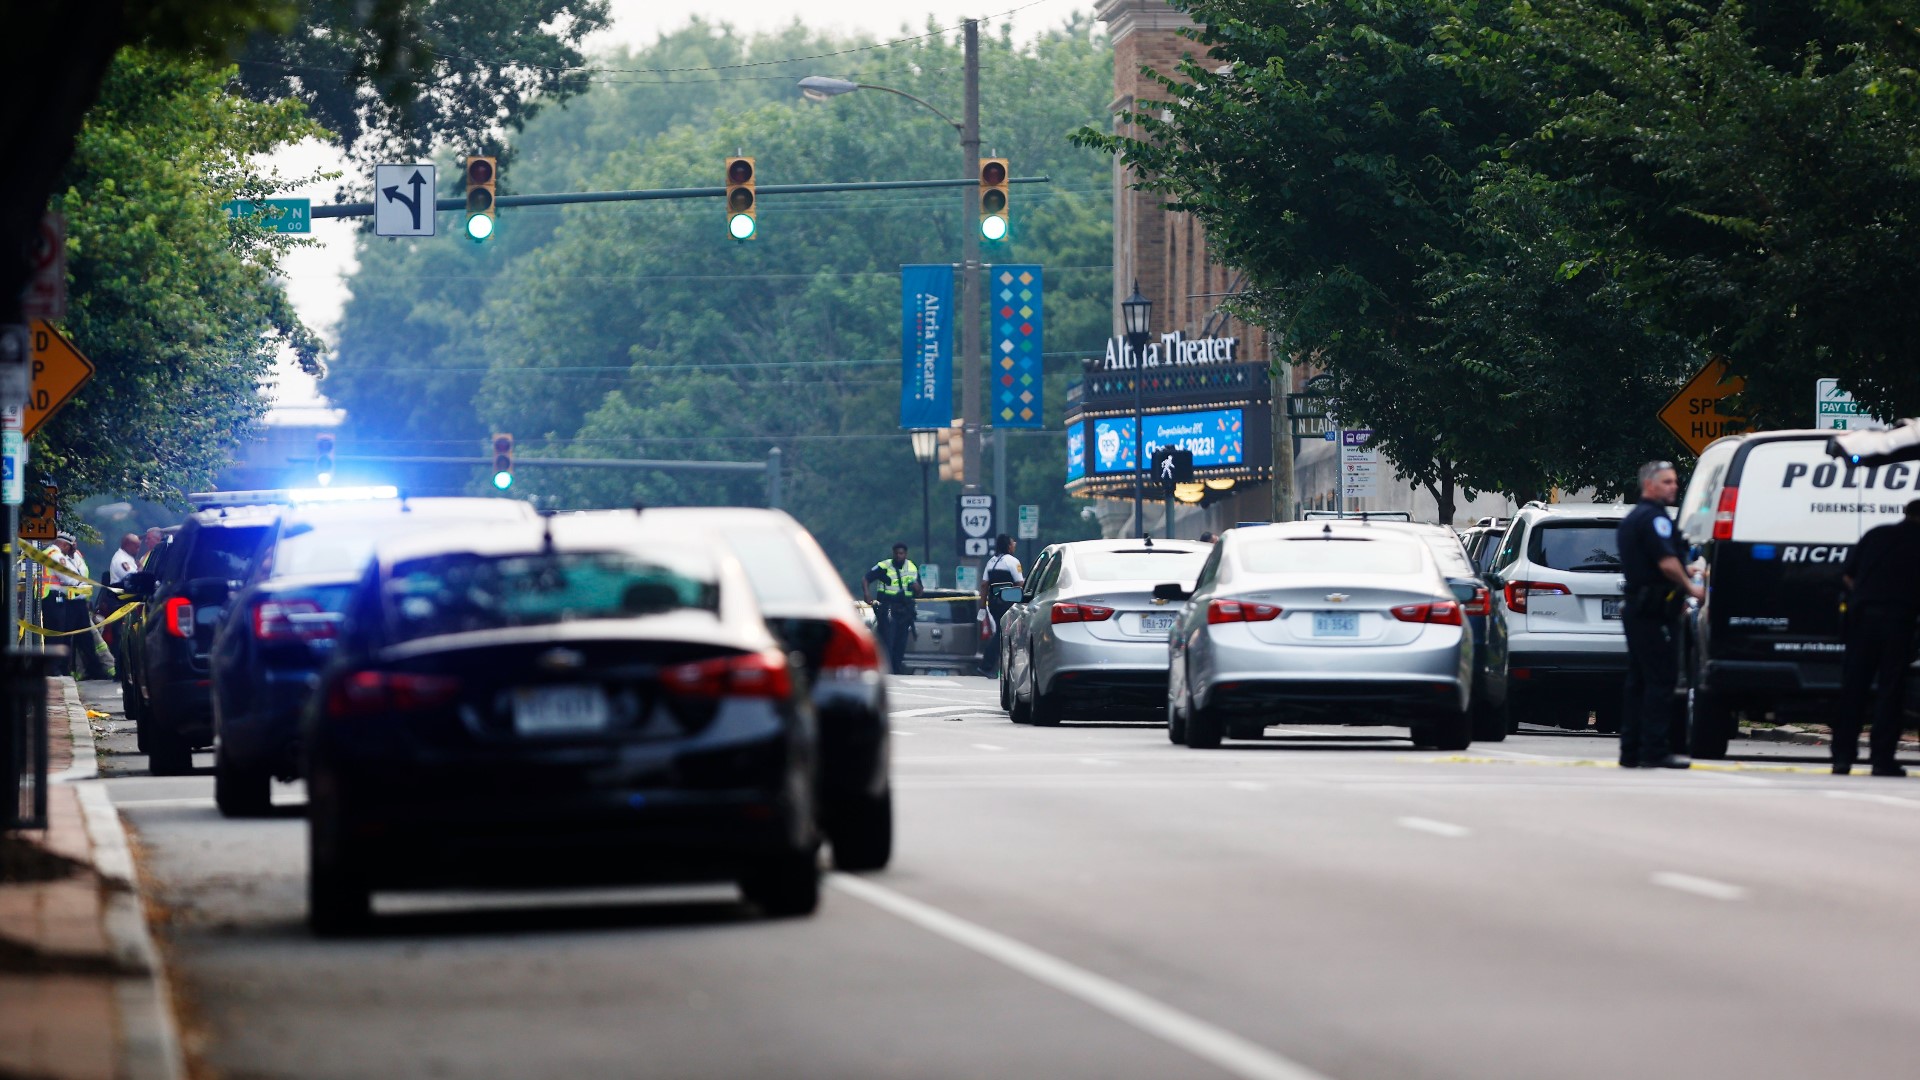 Seven people were shot, 2 fatally, in Richmond, Virginia when gunfire rang out Tuesday outside a downtown theater where a high school graduation ceremony just ended.